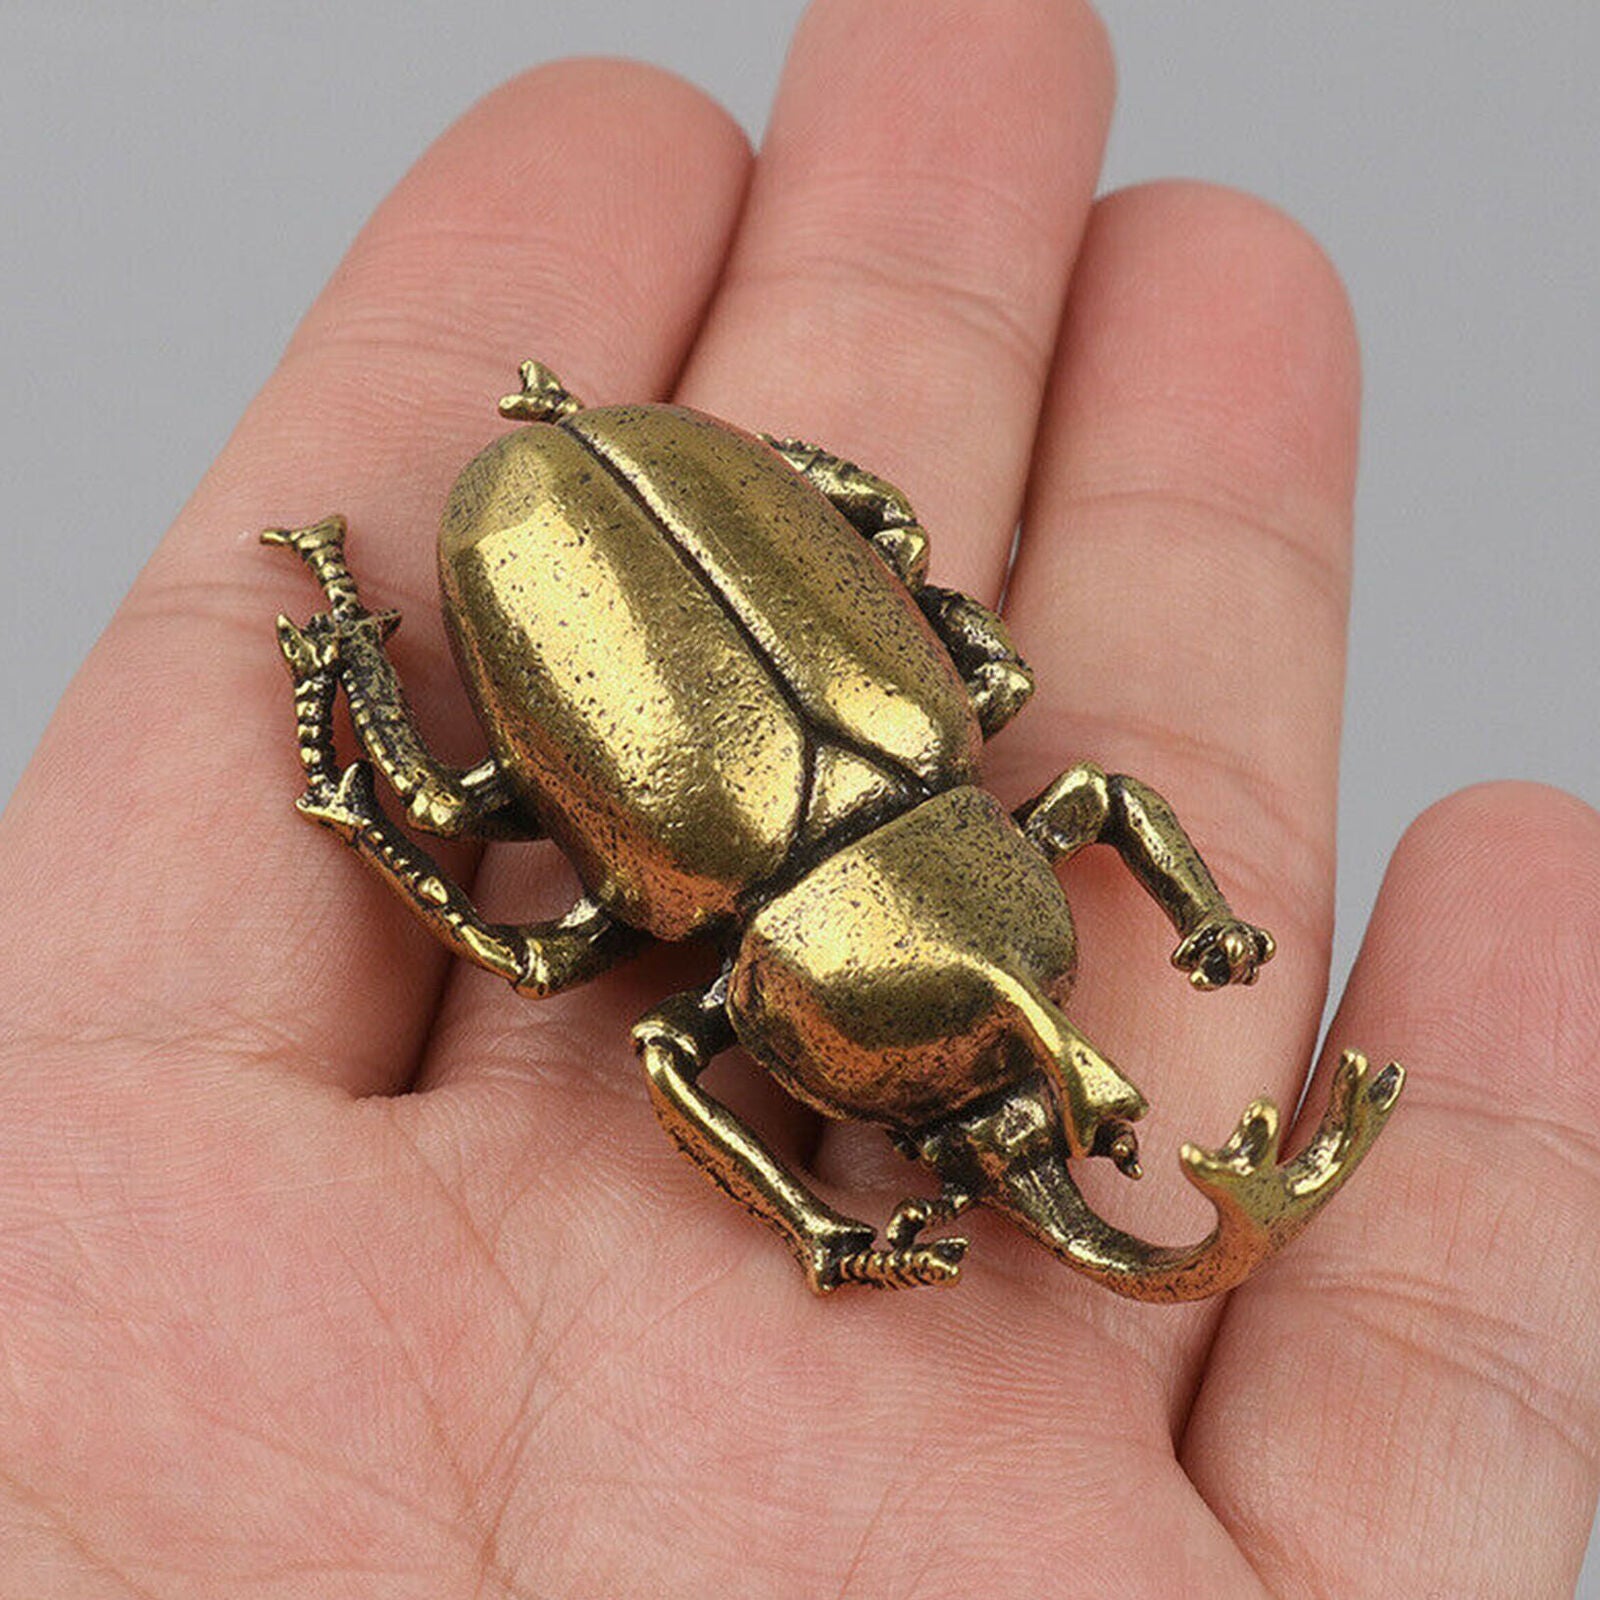 Brass Insect Decorative Crafts Statue House Ornaments Animal Gifts